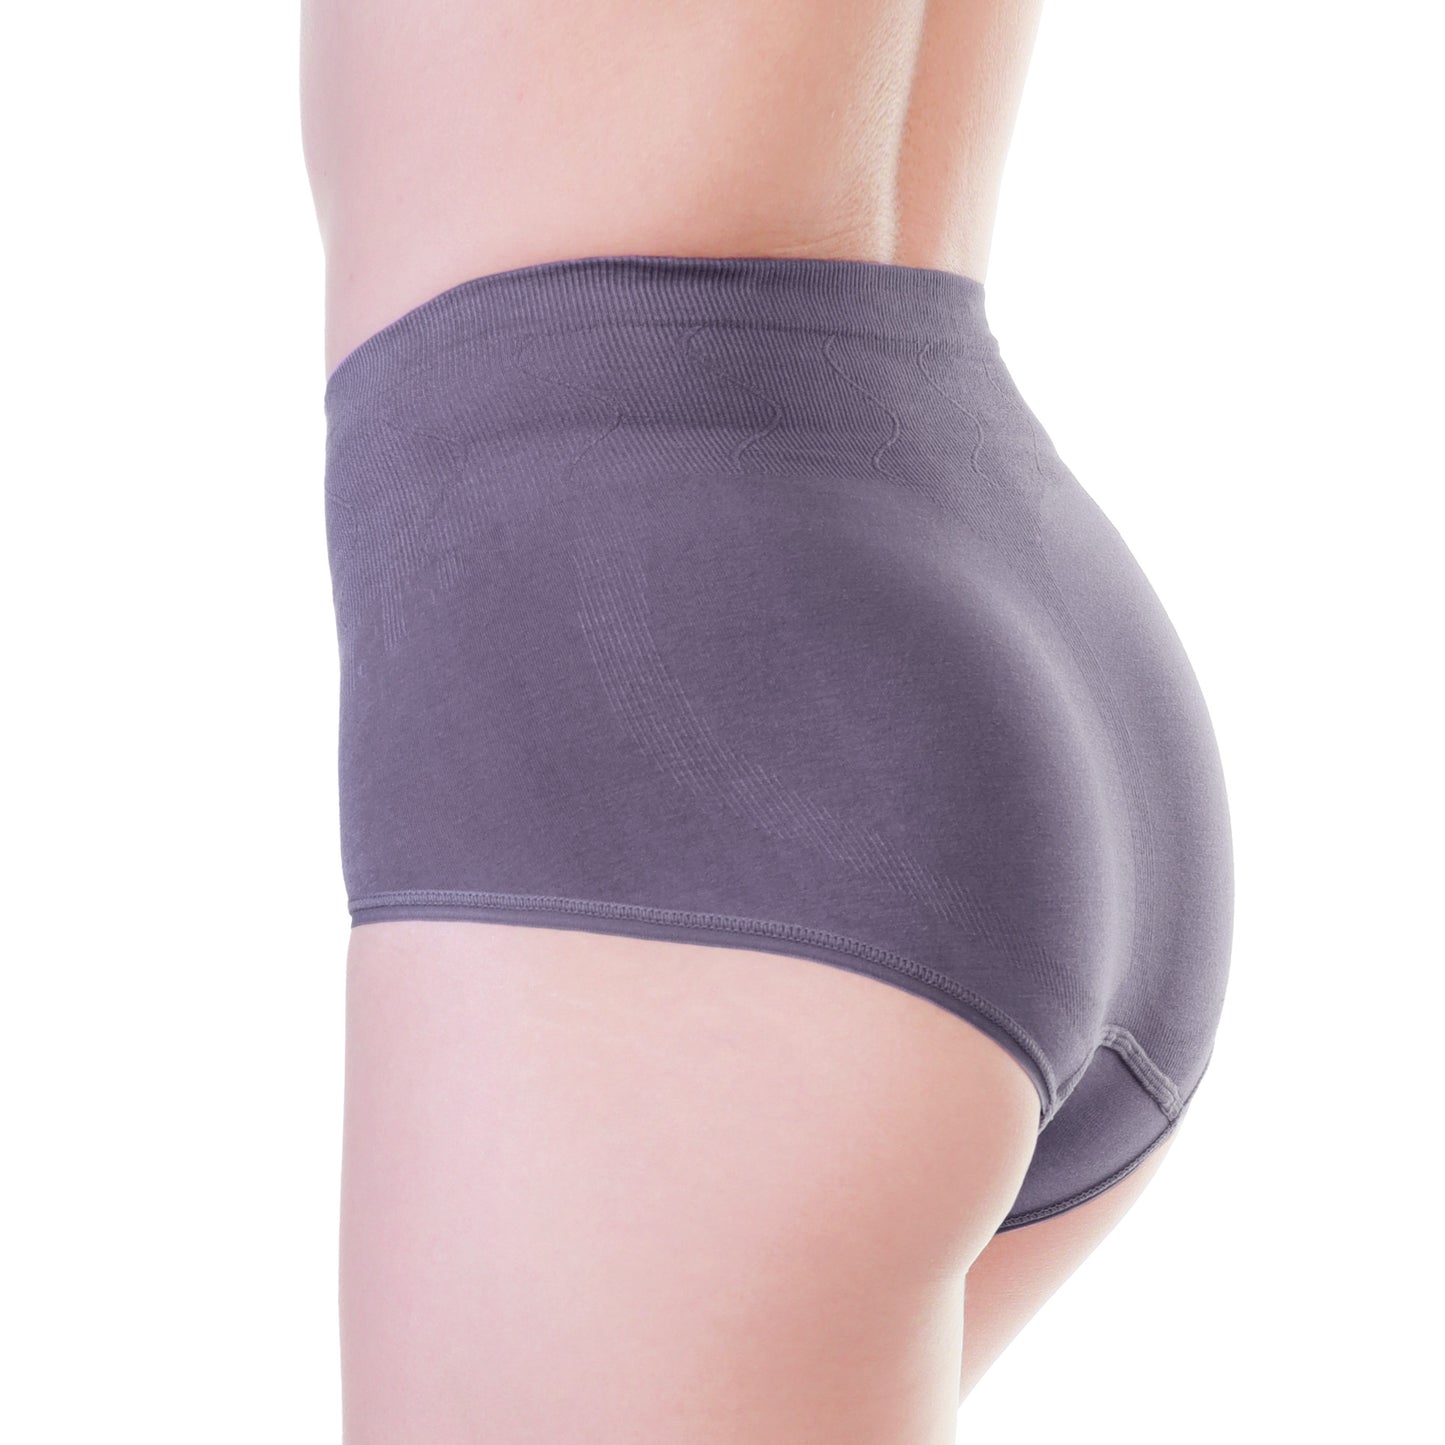 Seamless Cotton Light-Control Mid-Rise Briefs Panties (6-Pack)